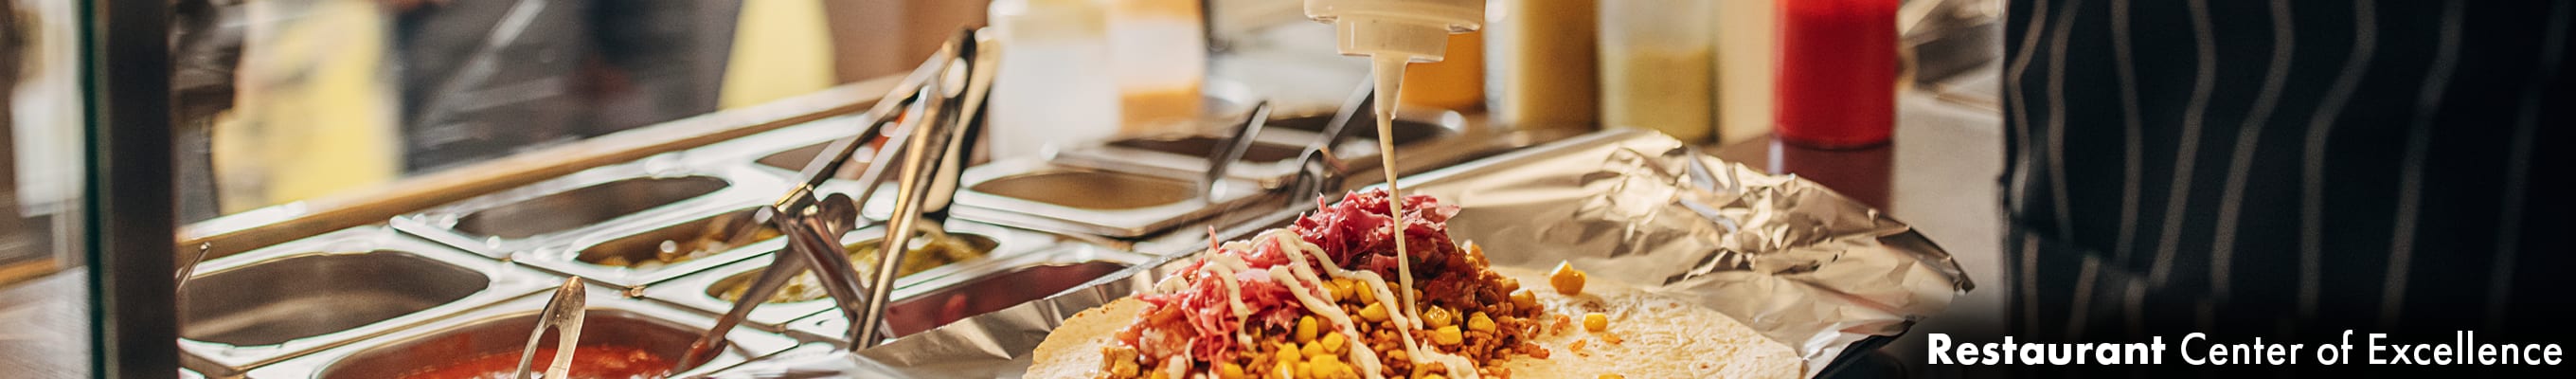 cook placing sauce on a burrito, standing in front of a grid of ingredients where customers can see and choose their ingredients for a burrito